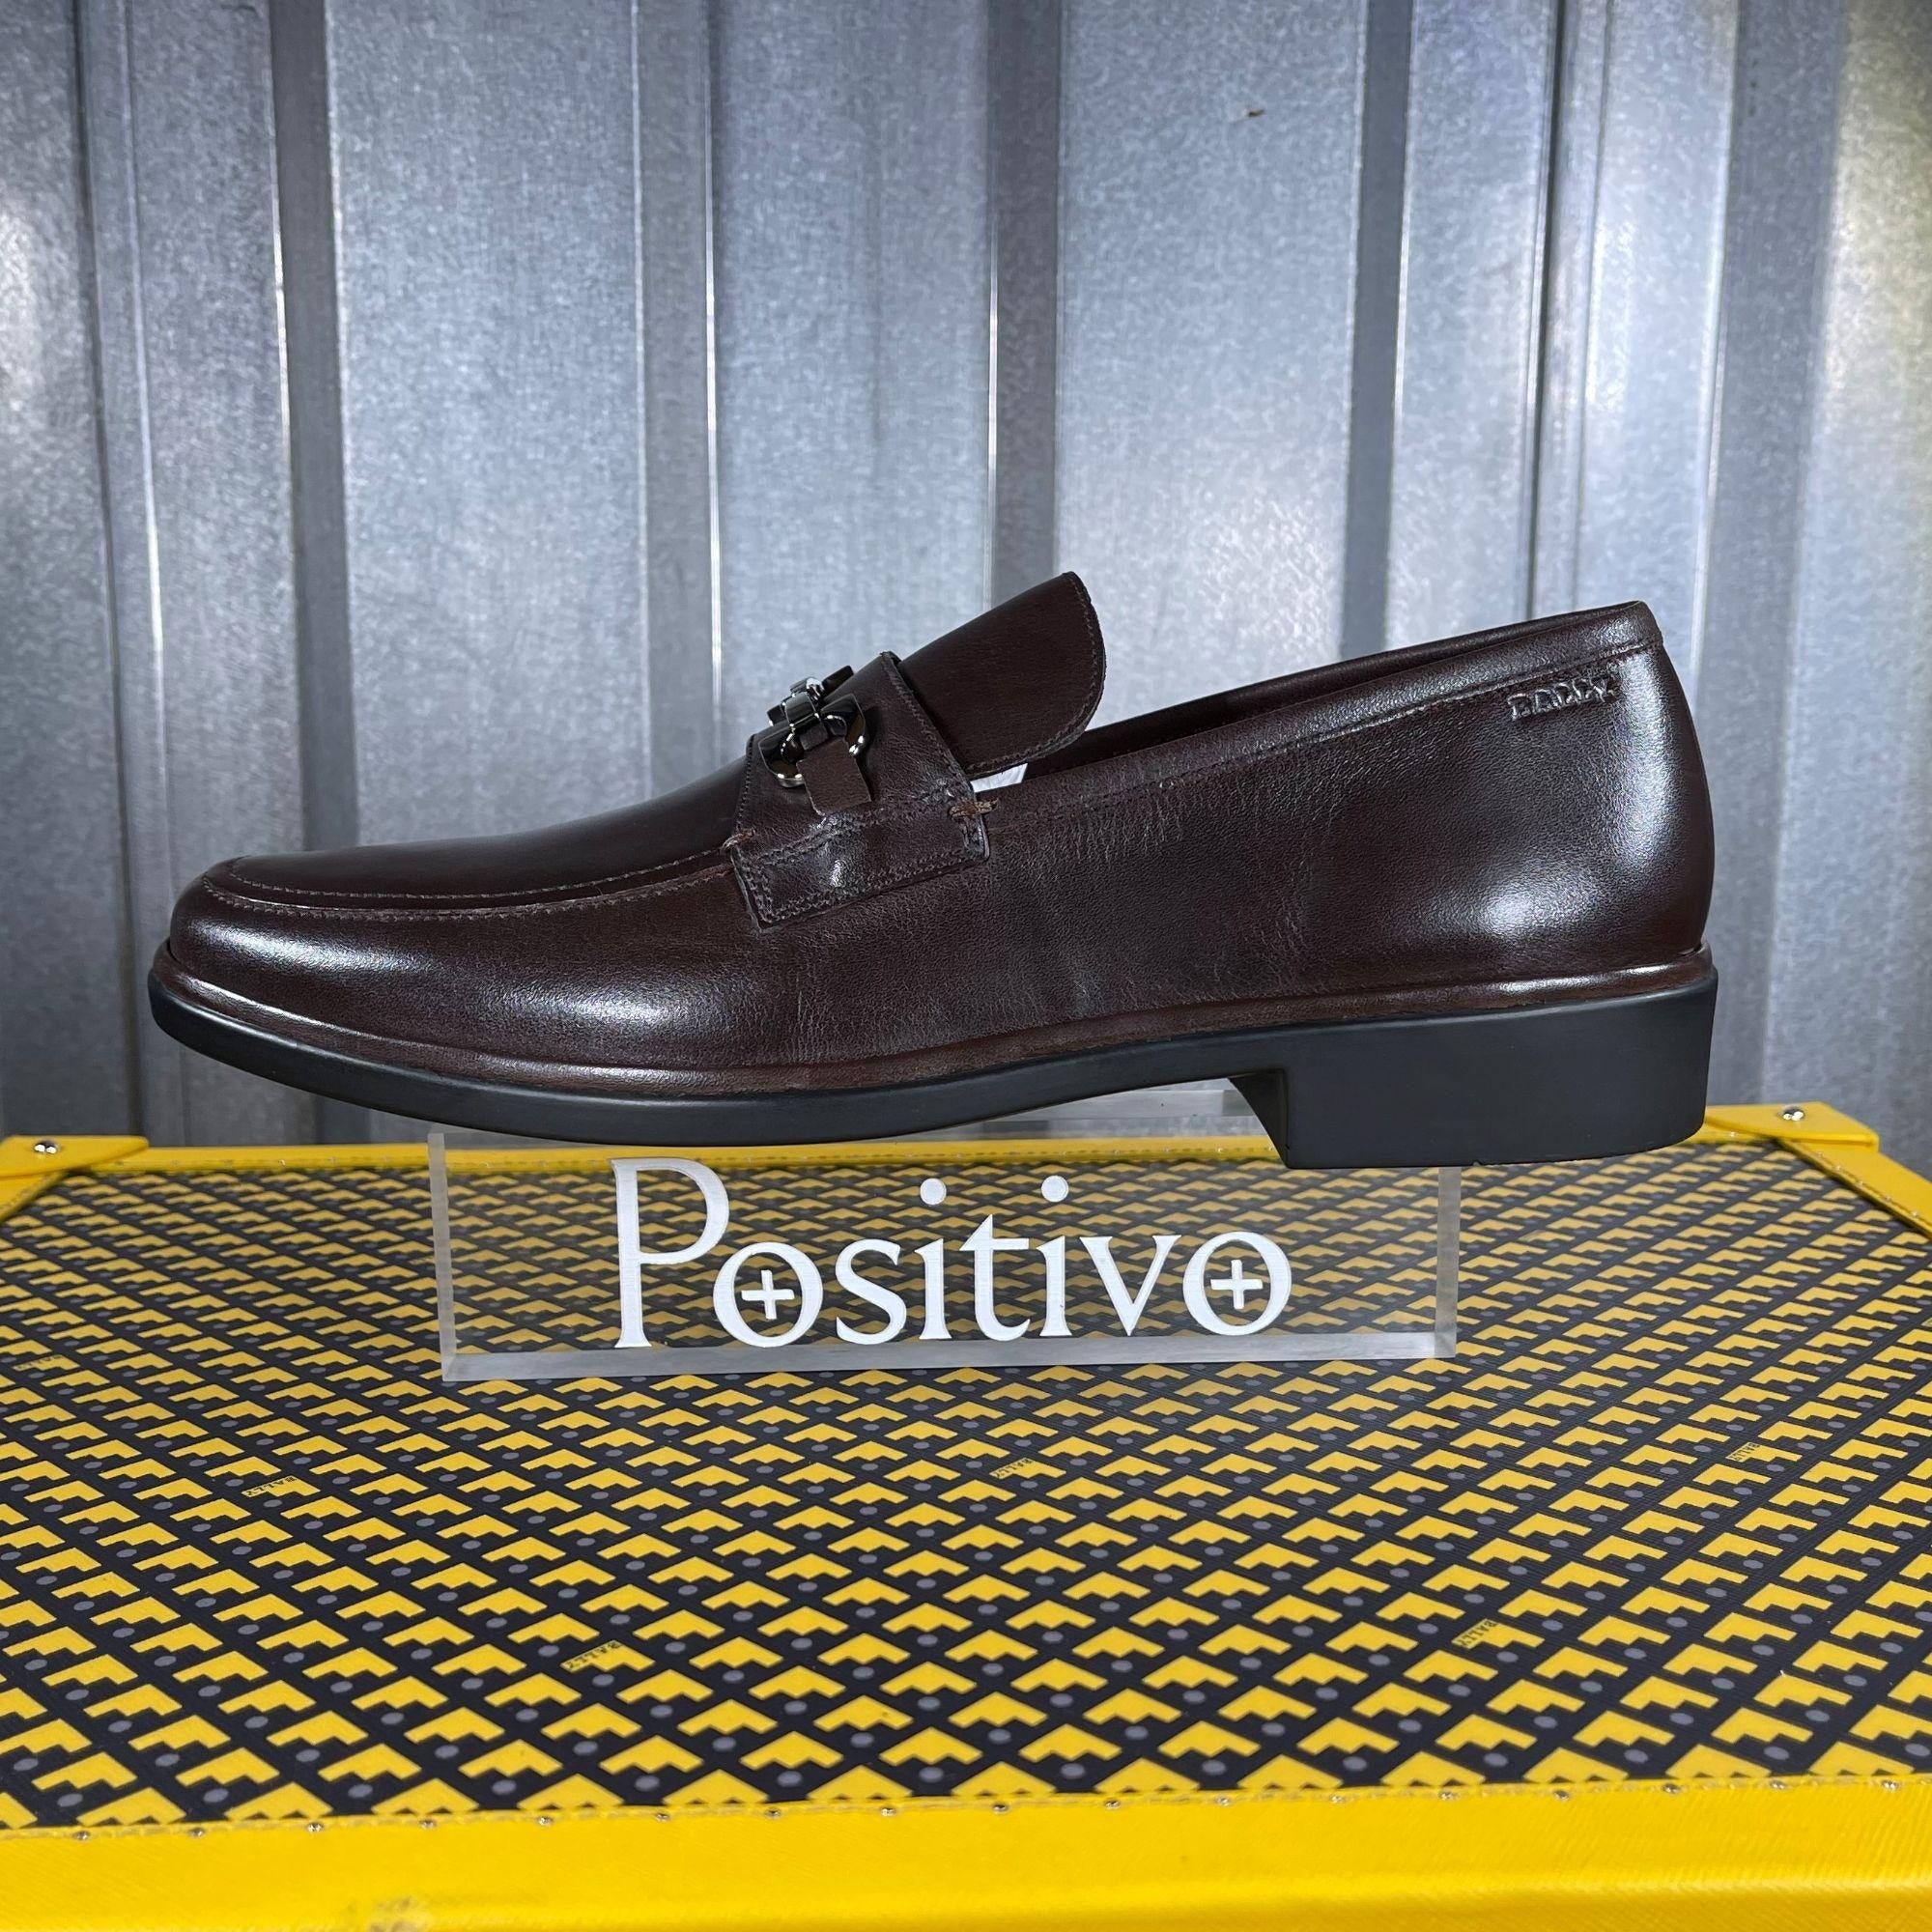 Bally Cadore Chocolate Leather Loafers | Positivo Clothing